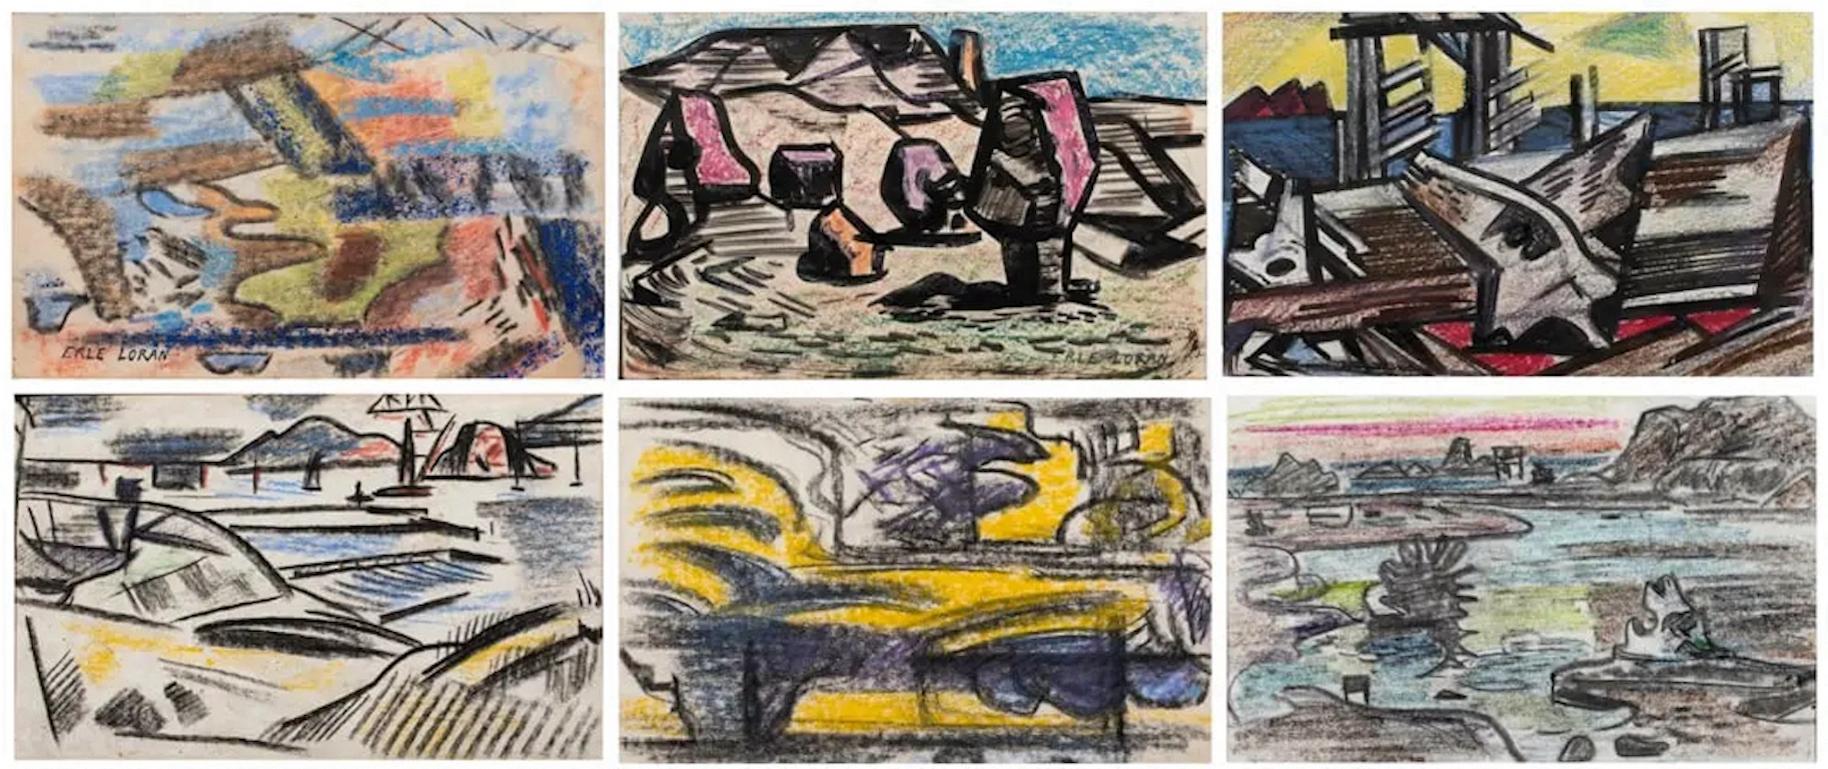 Erle Loran (American, 1905-1999)
Set of six landscapes
Each mixed media on paper
Two signed, lower right and left corners
Sheet (largest, unframed): 8.25"h x 11.25"w. 

Loran was a very influential Bay Area artist whose works are held in public